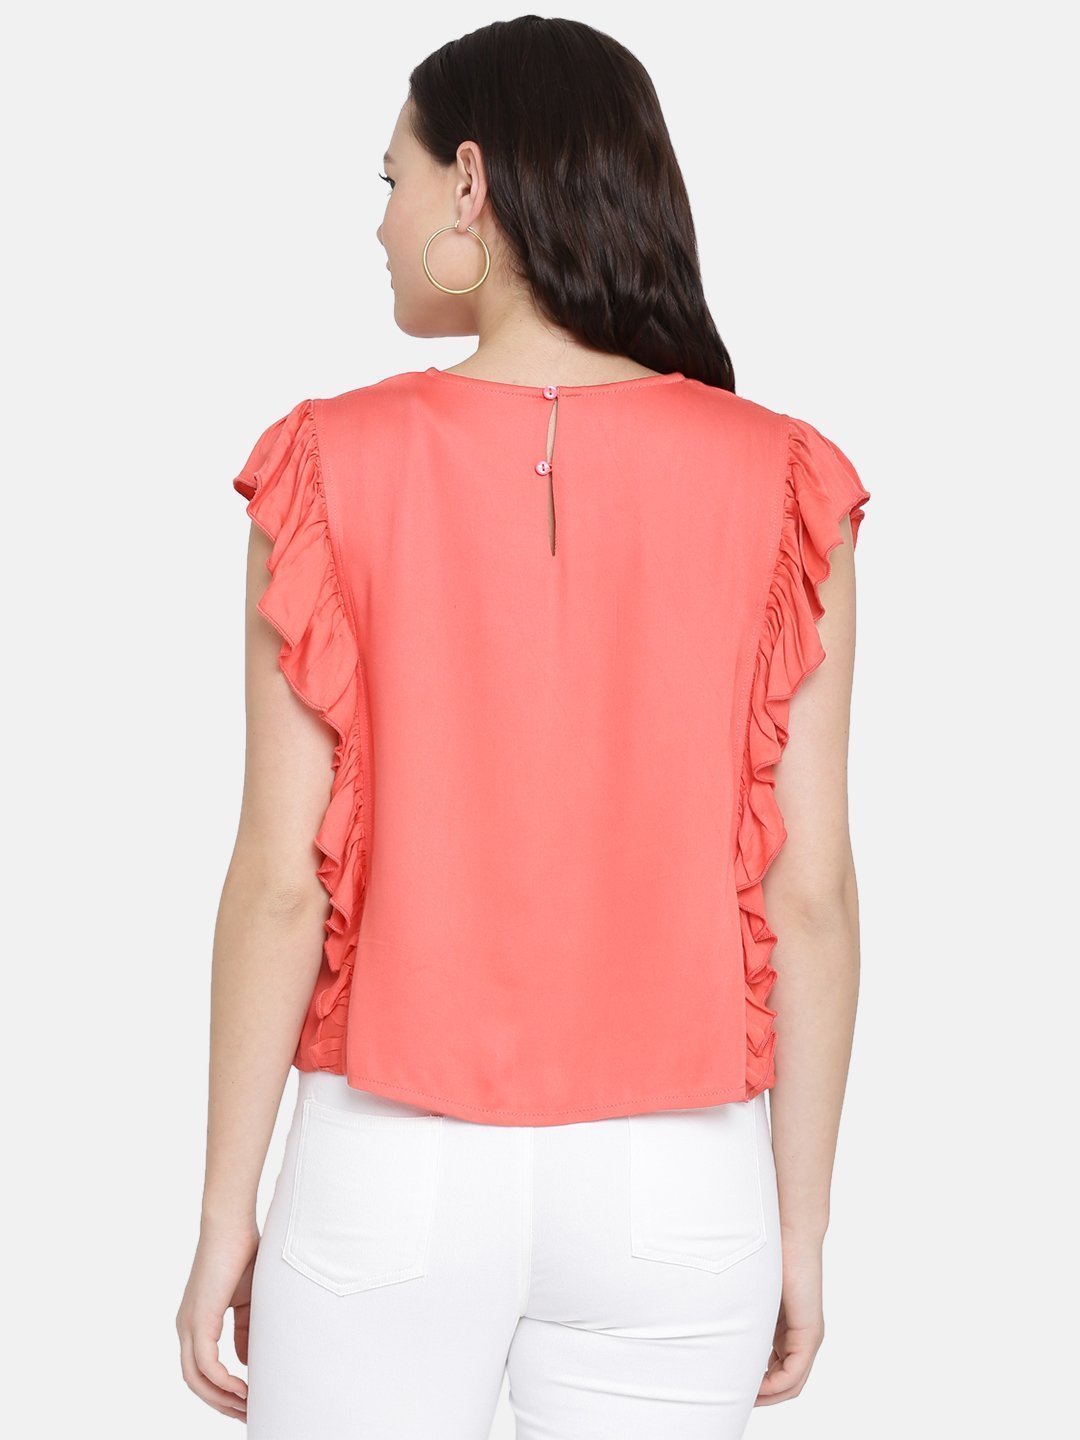 IS.U Coral Sleeveless Frill Top